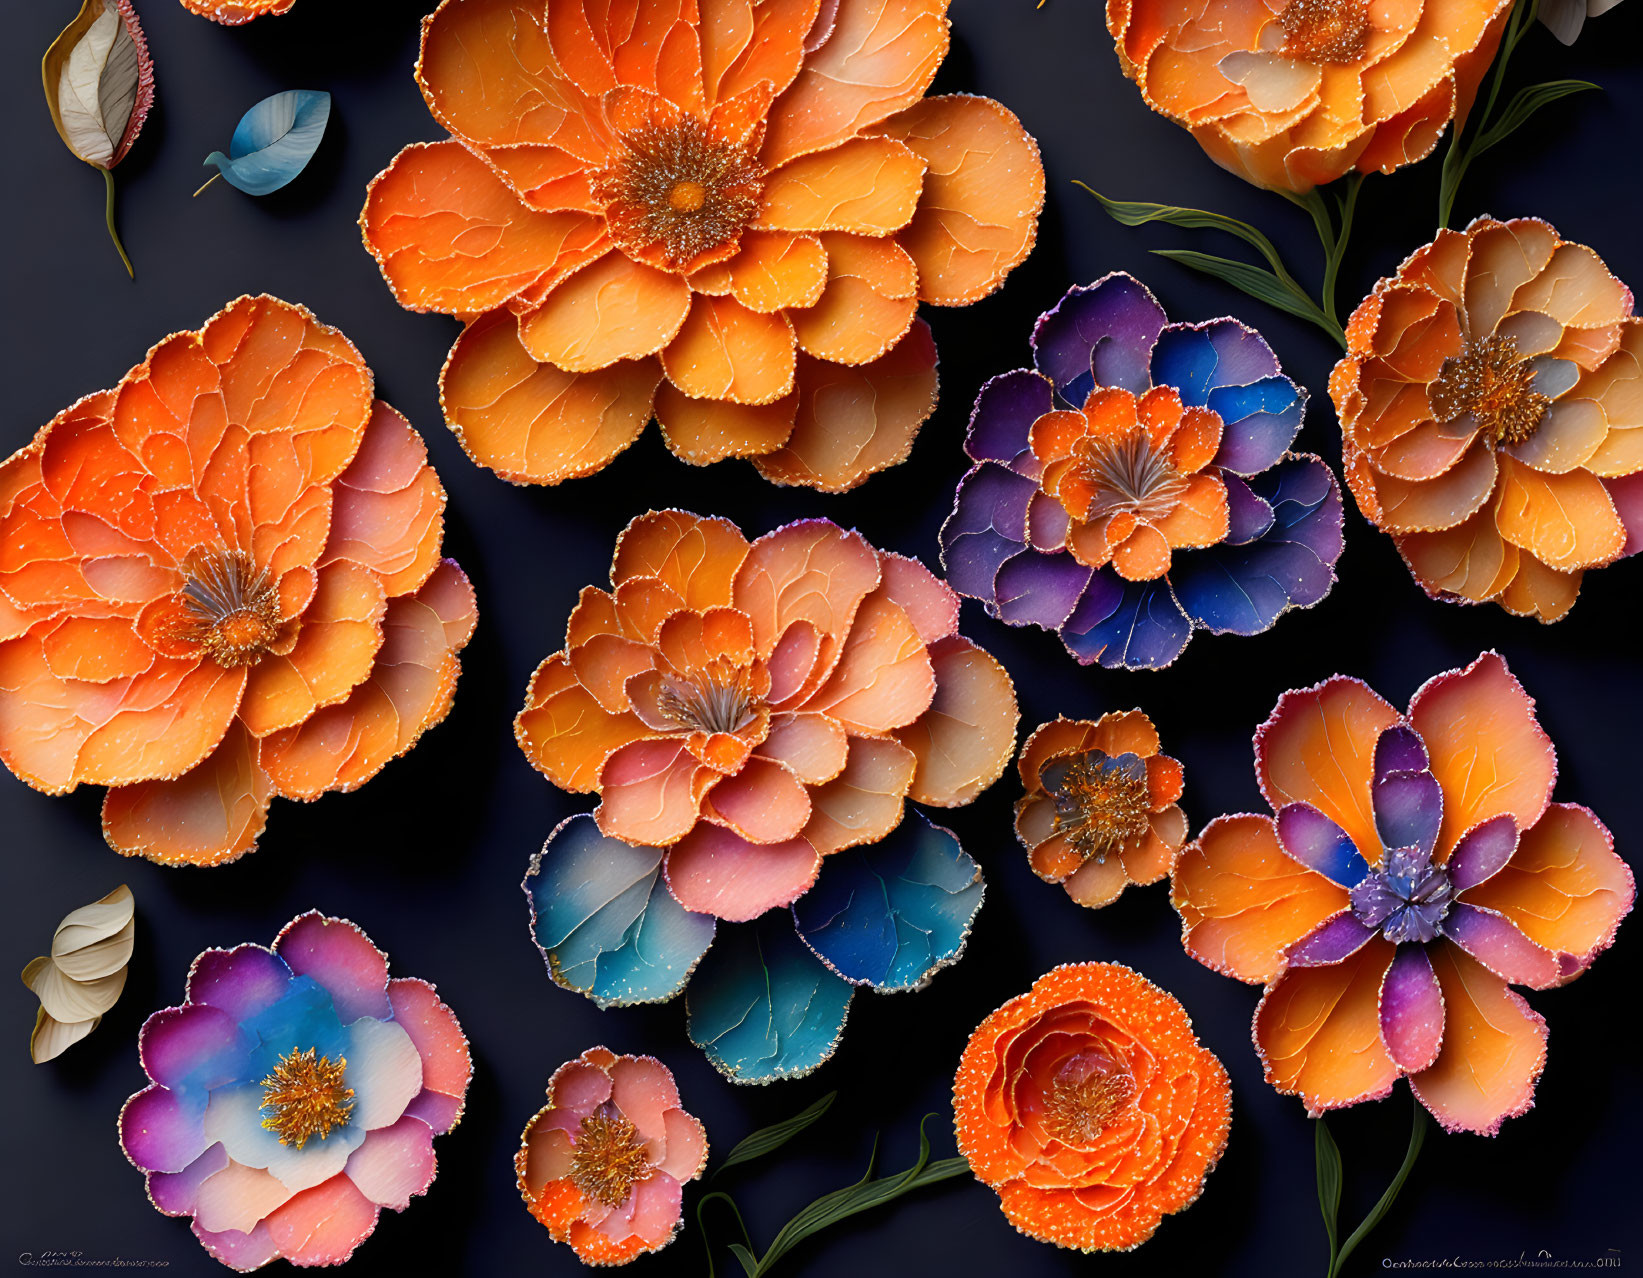 Colorful Handcrafted Paper Flowers in Orange, Peach, and Blue on Dark Background